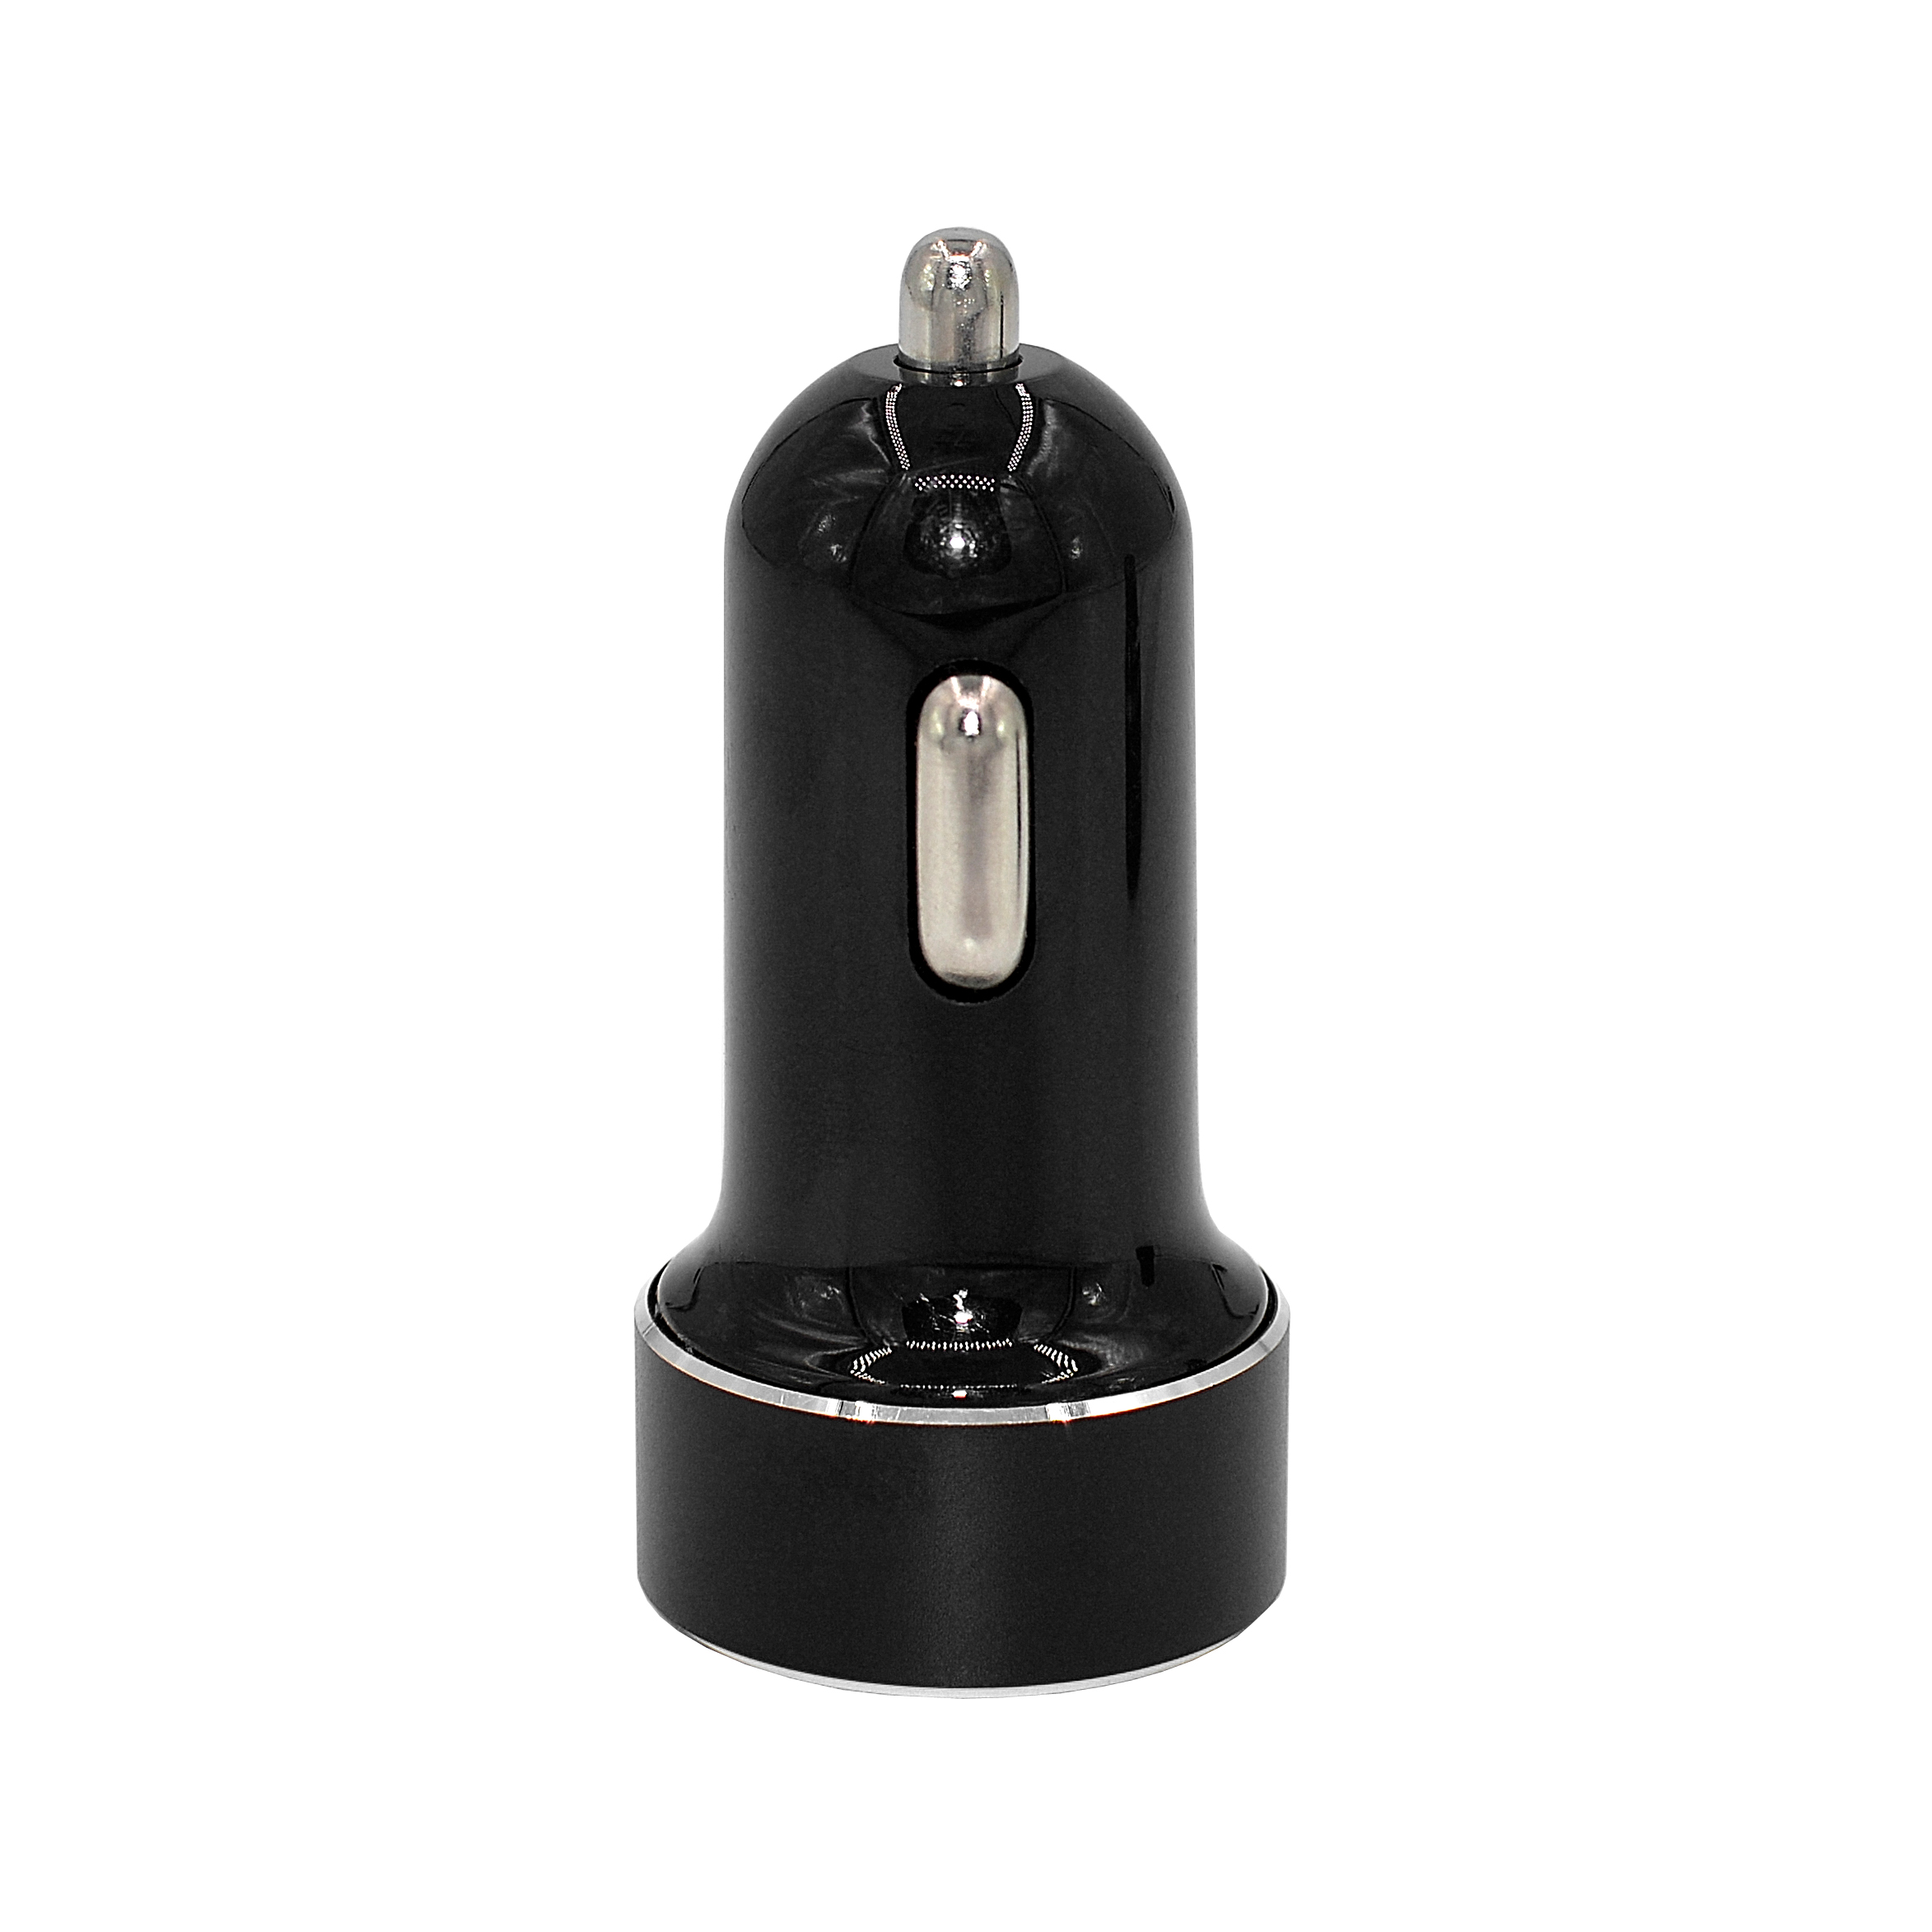 PD car charger 18W fast charger hot sale